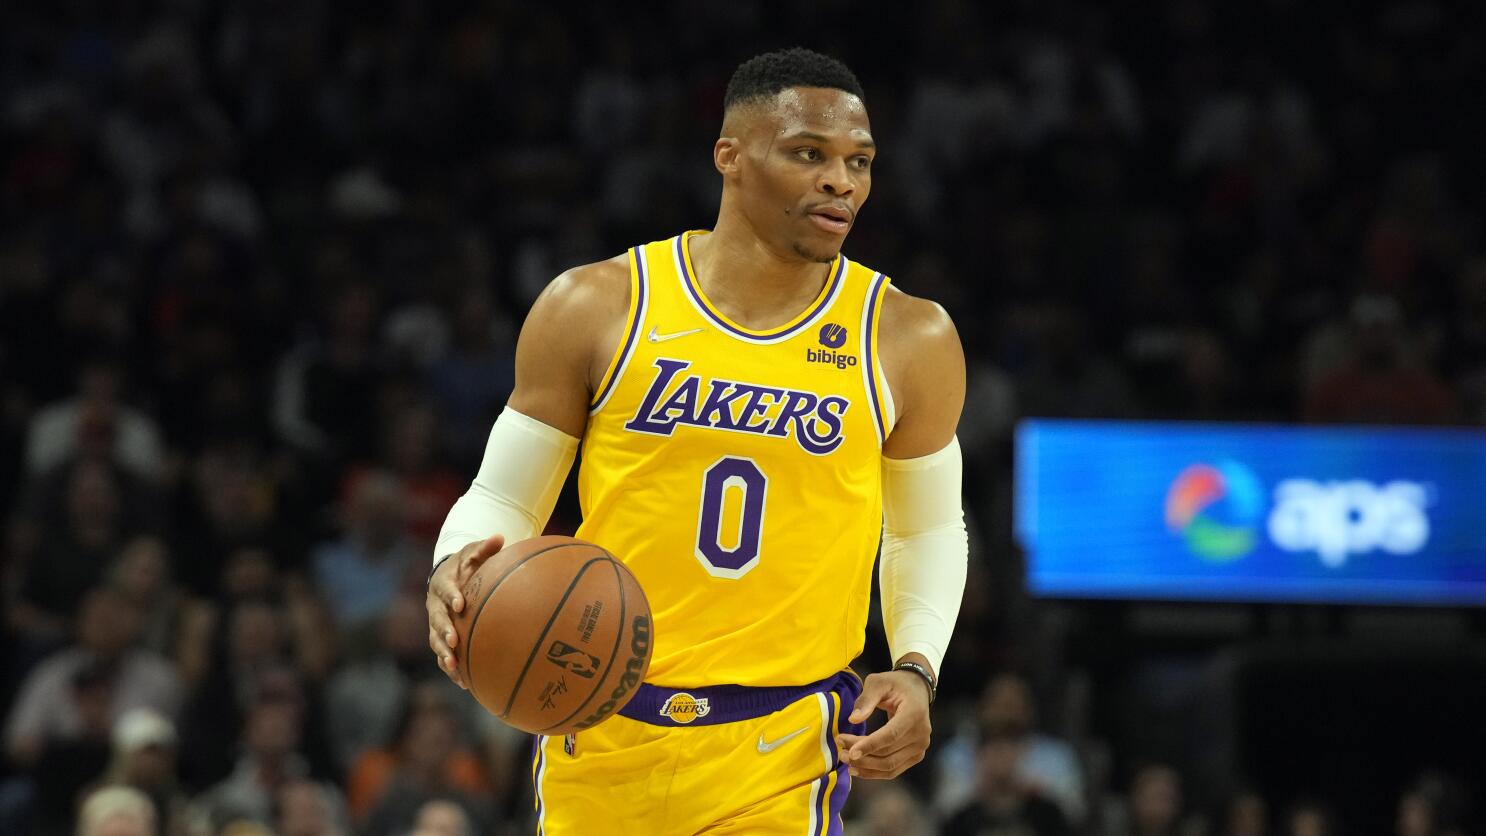 WATCH: Lakers' Russell Westbrook throws first pitch at Dodgers game